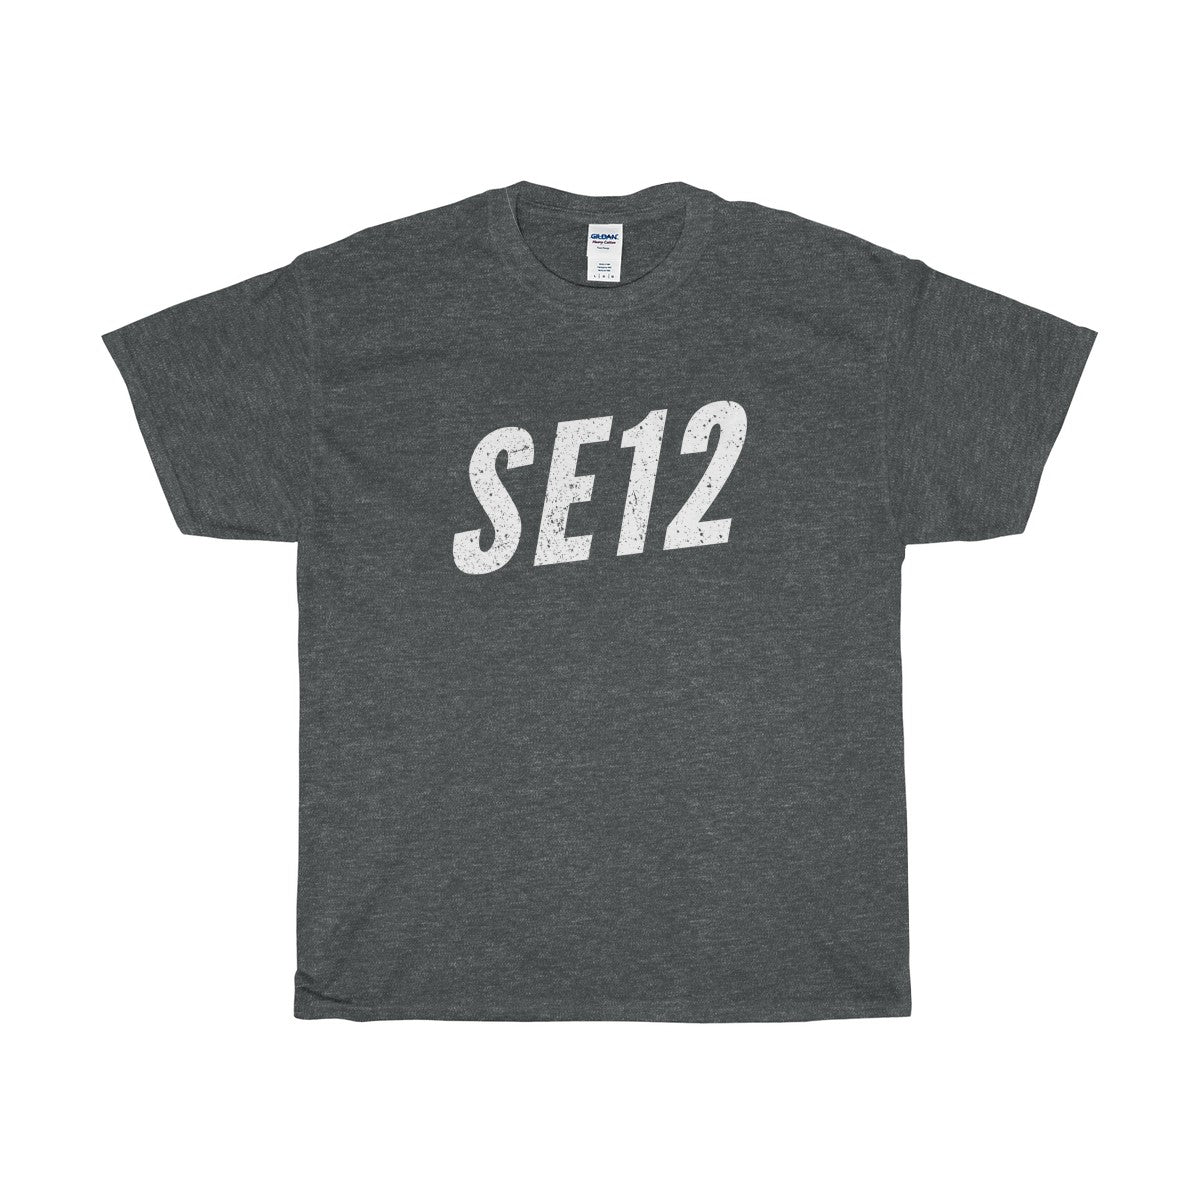 Hither Green SE12 T-Shirt